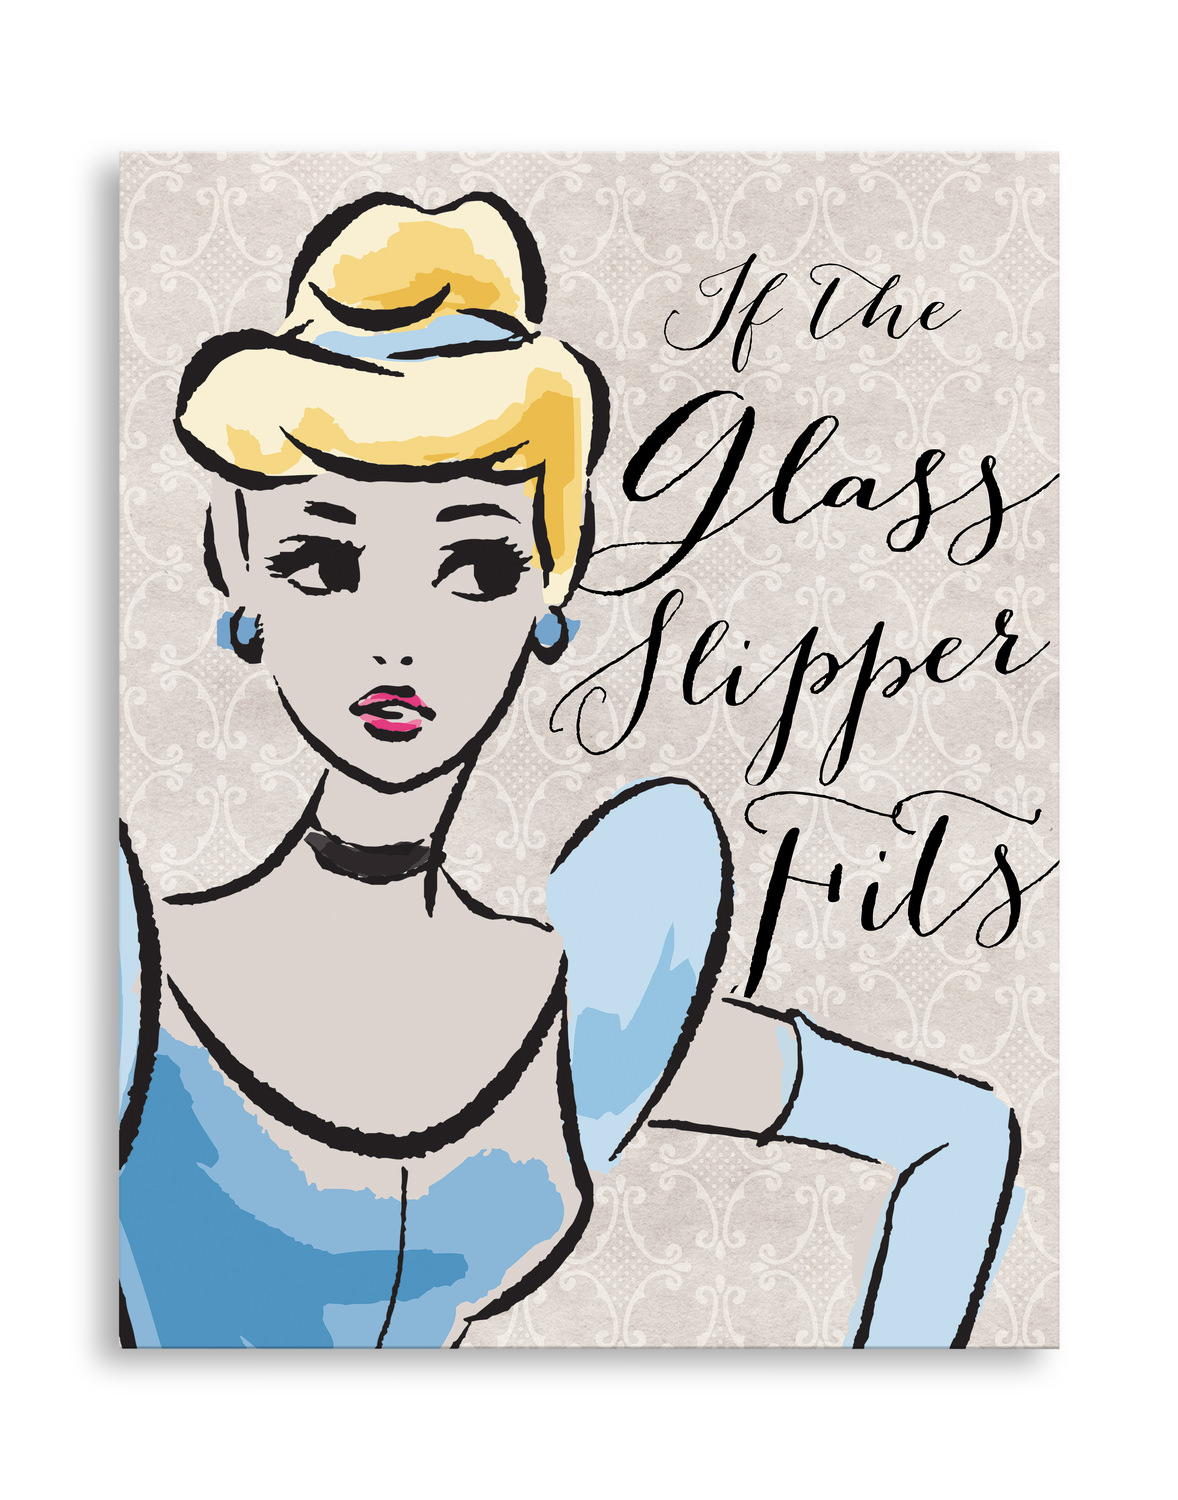 Gus and Cinderella Embroidery design files